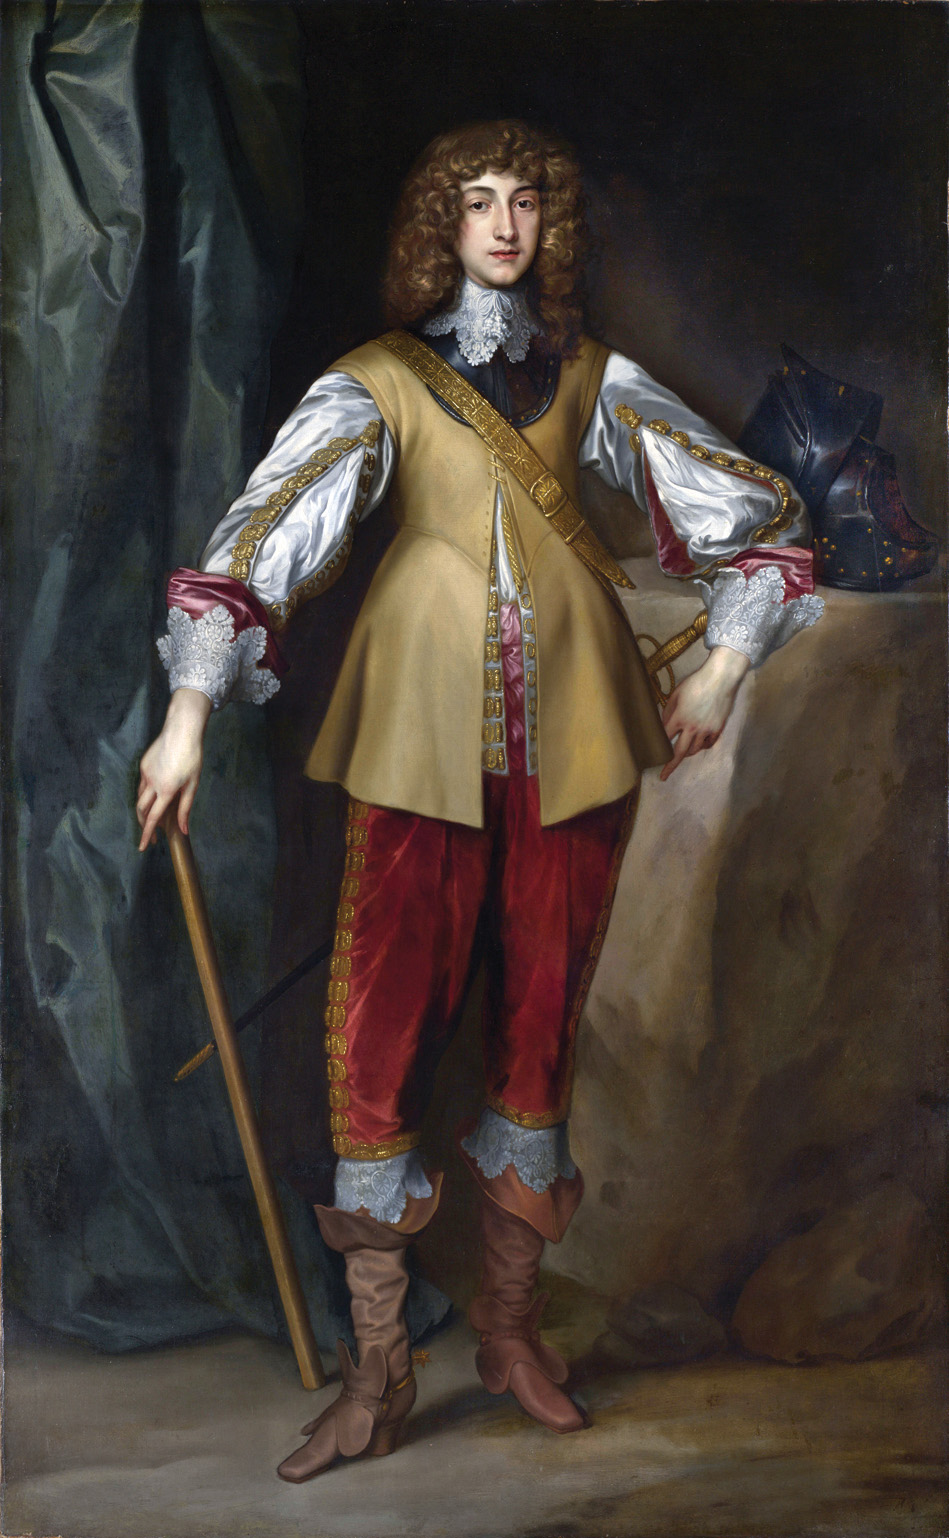 Prince Rupert of the Rhine, the dashing and skilled 23-year-old nephew of English King Charles I, led Royalist forces at Marston Moor.